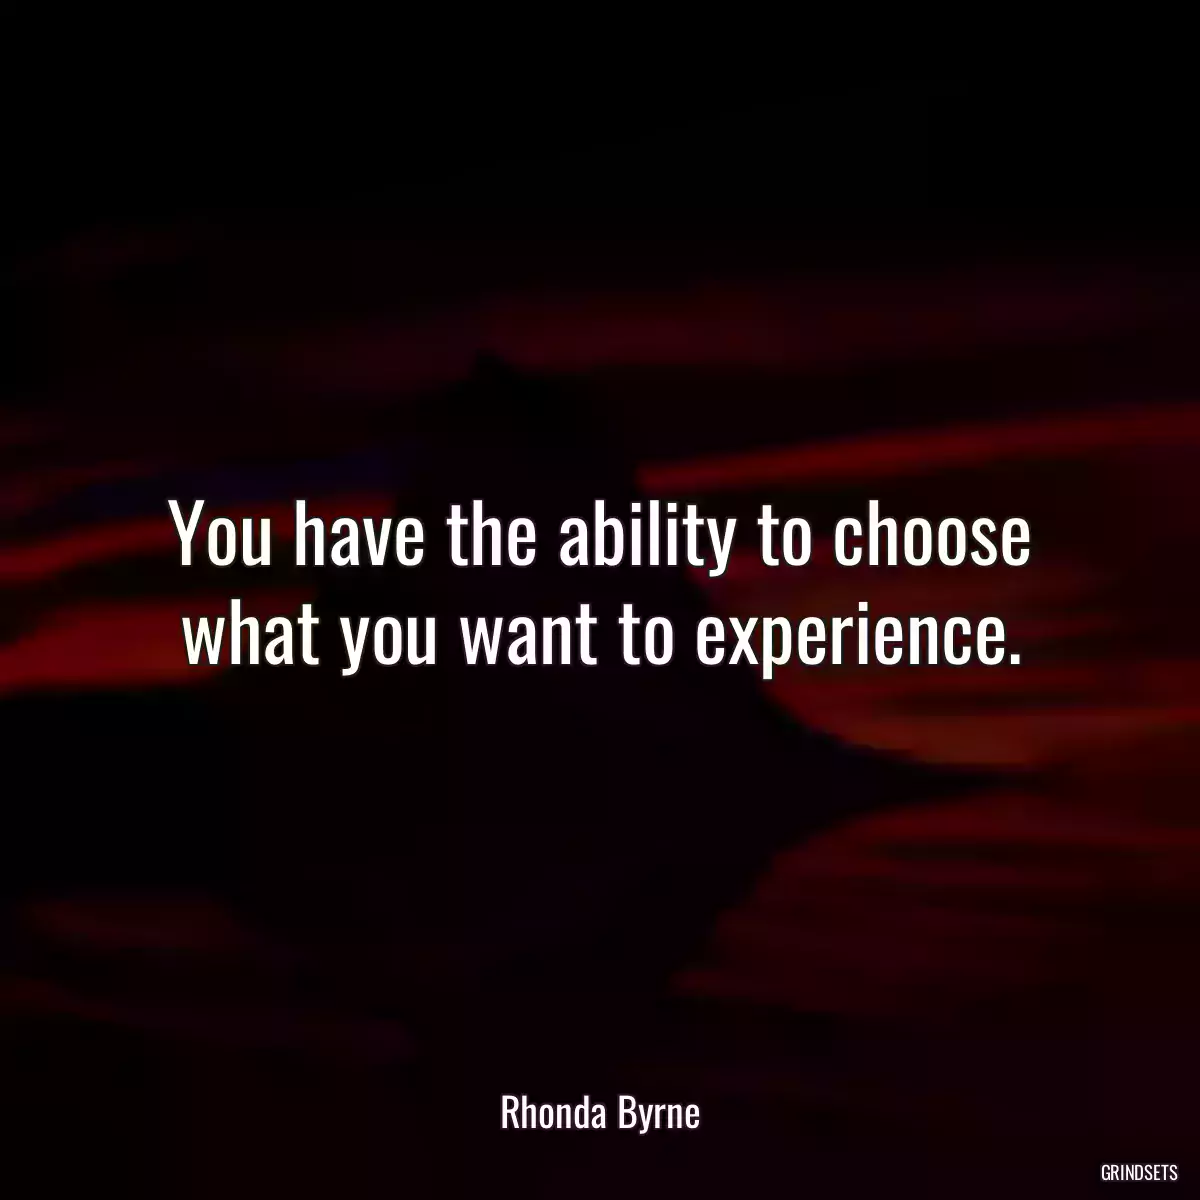 You have the ability to choose what you want to experience.